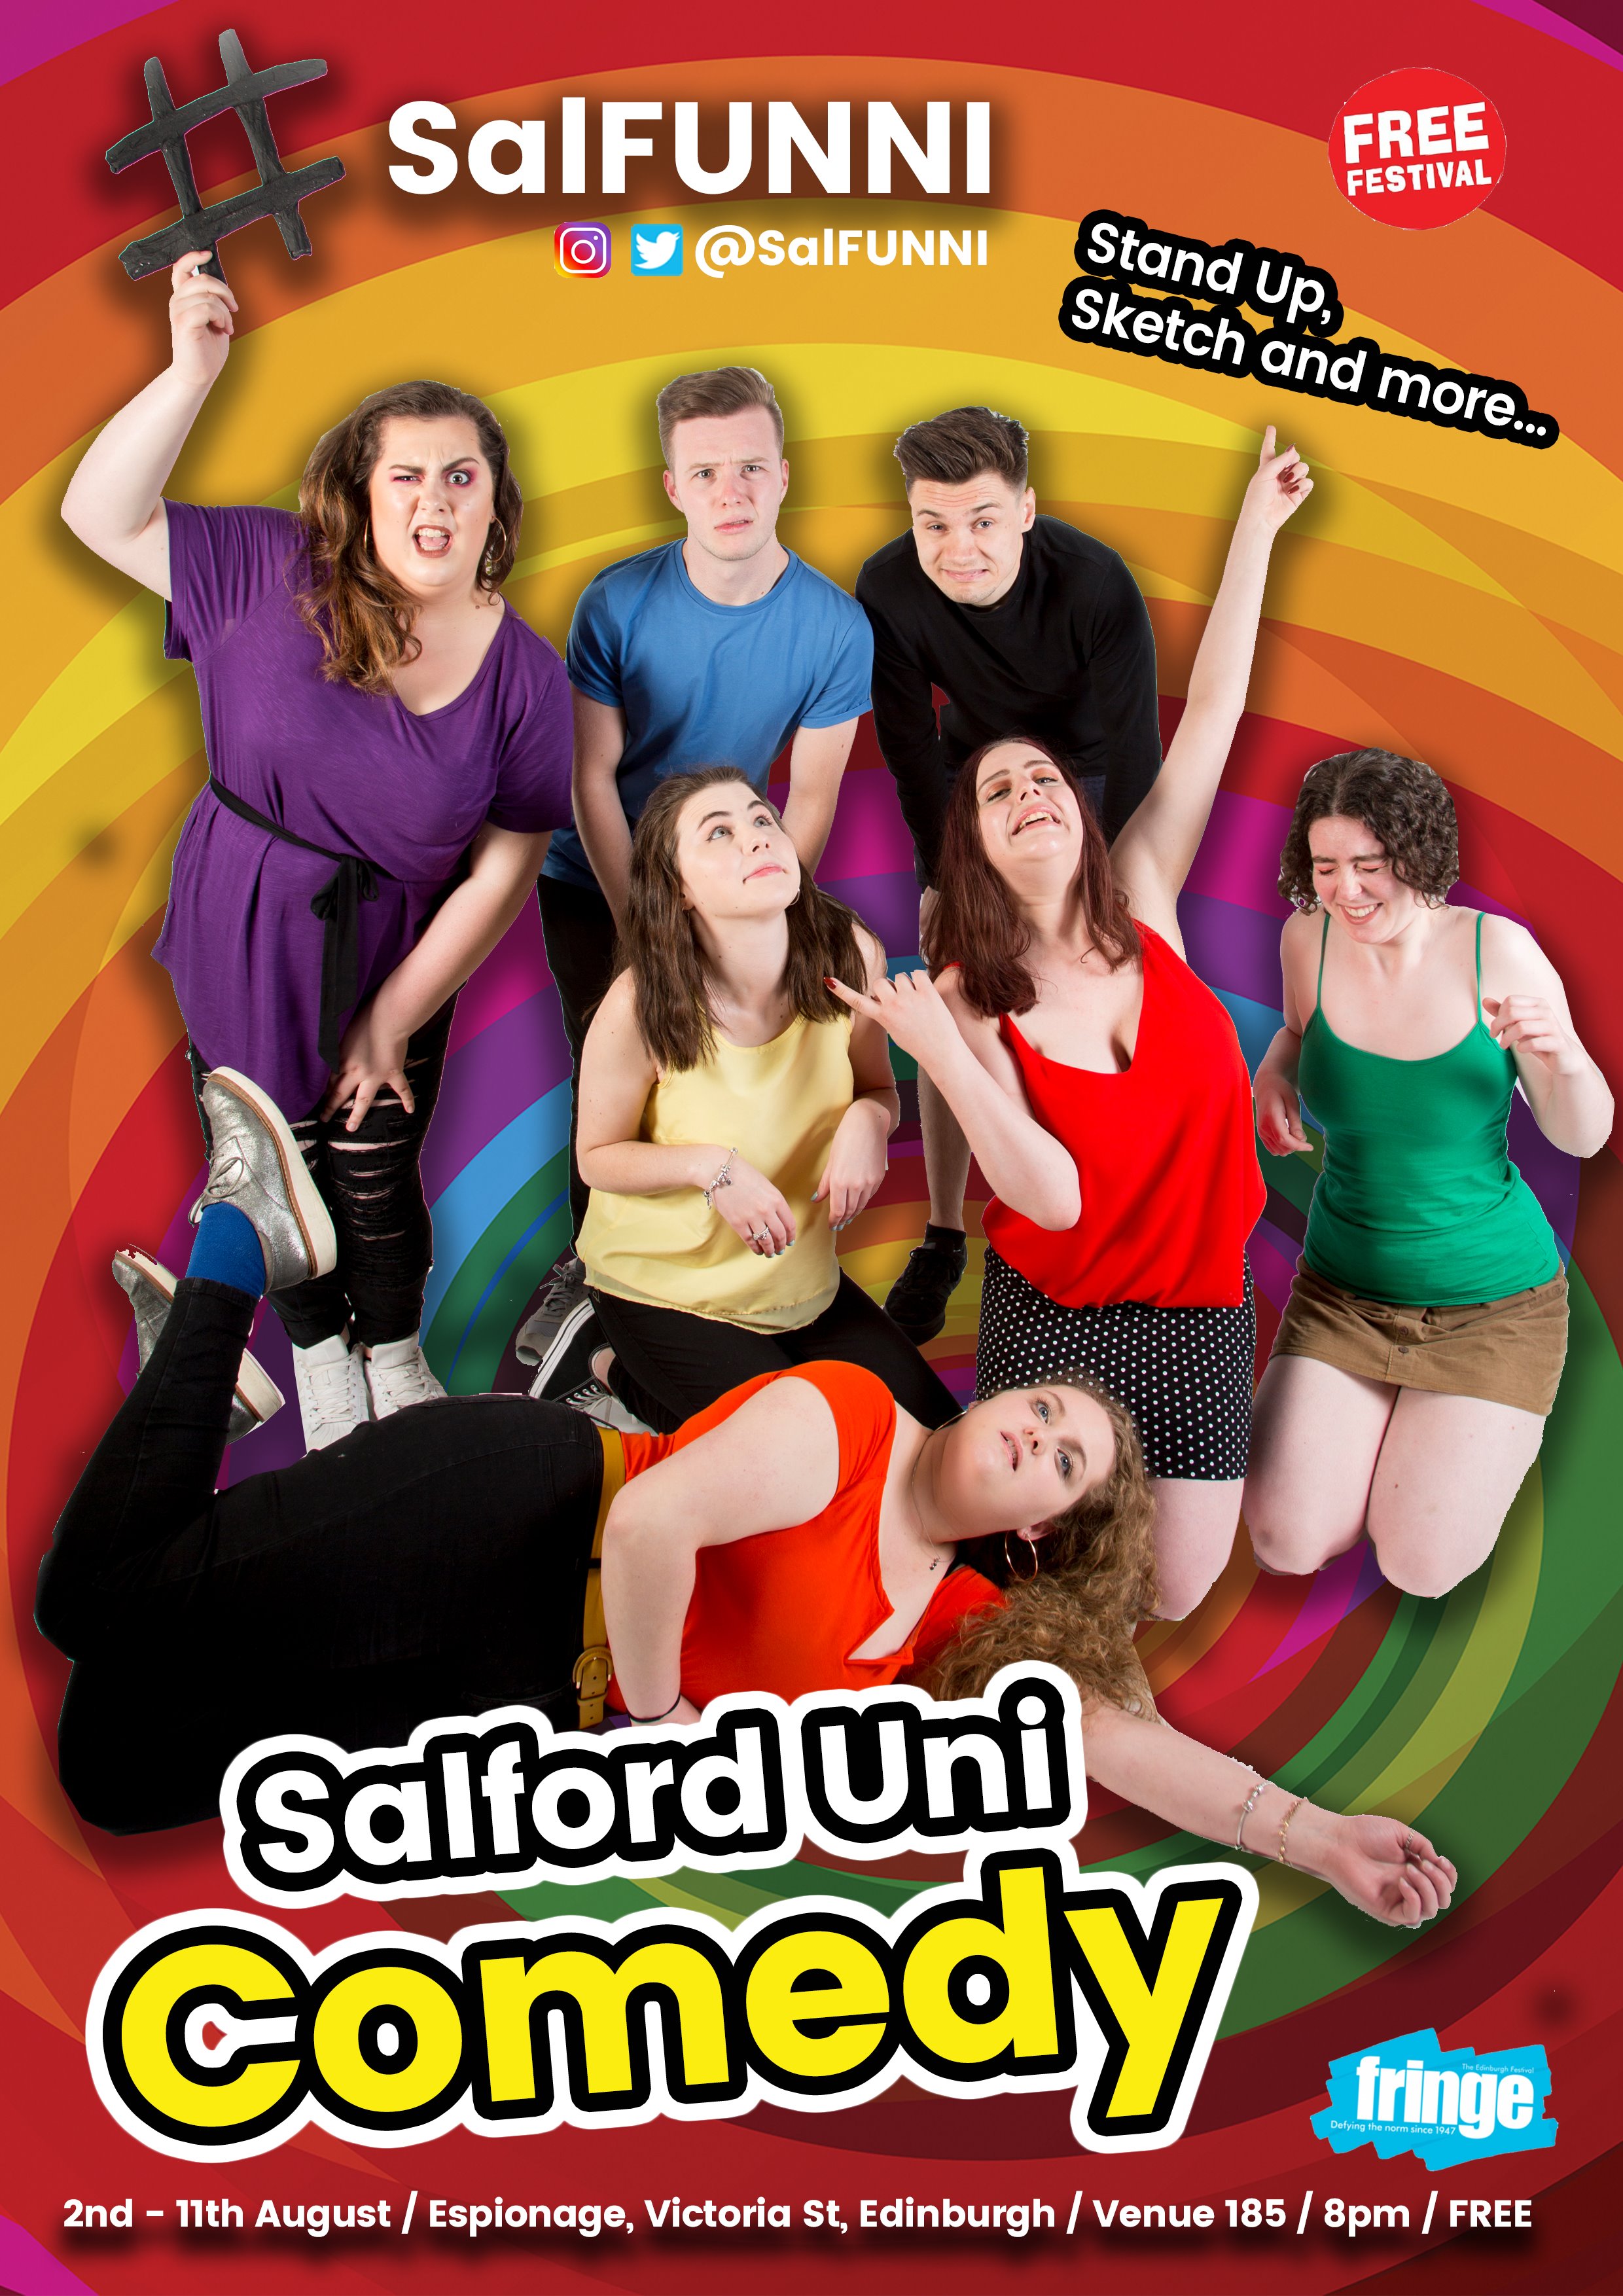 The poster for Comedy from Salford Uni